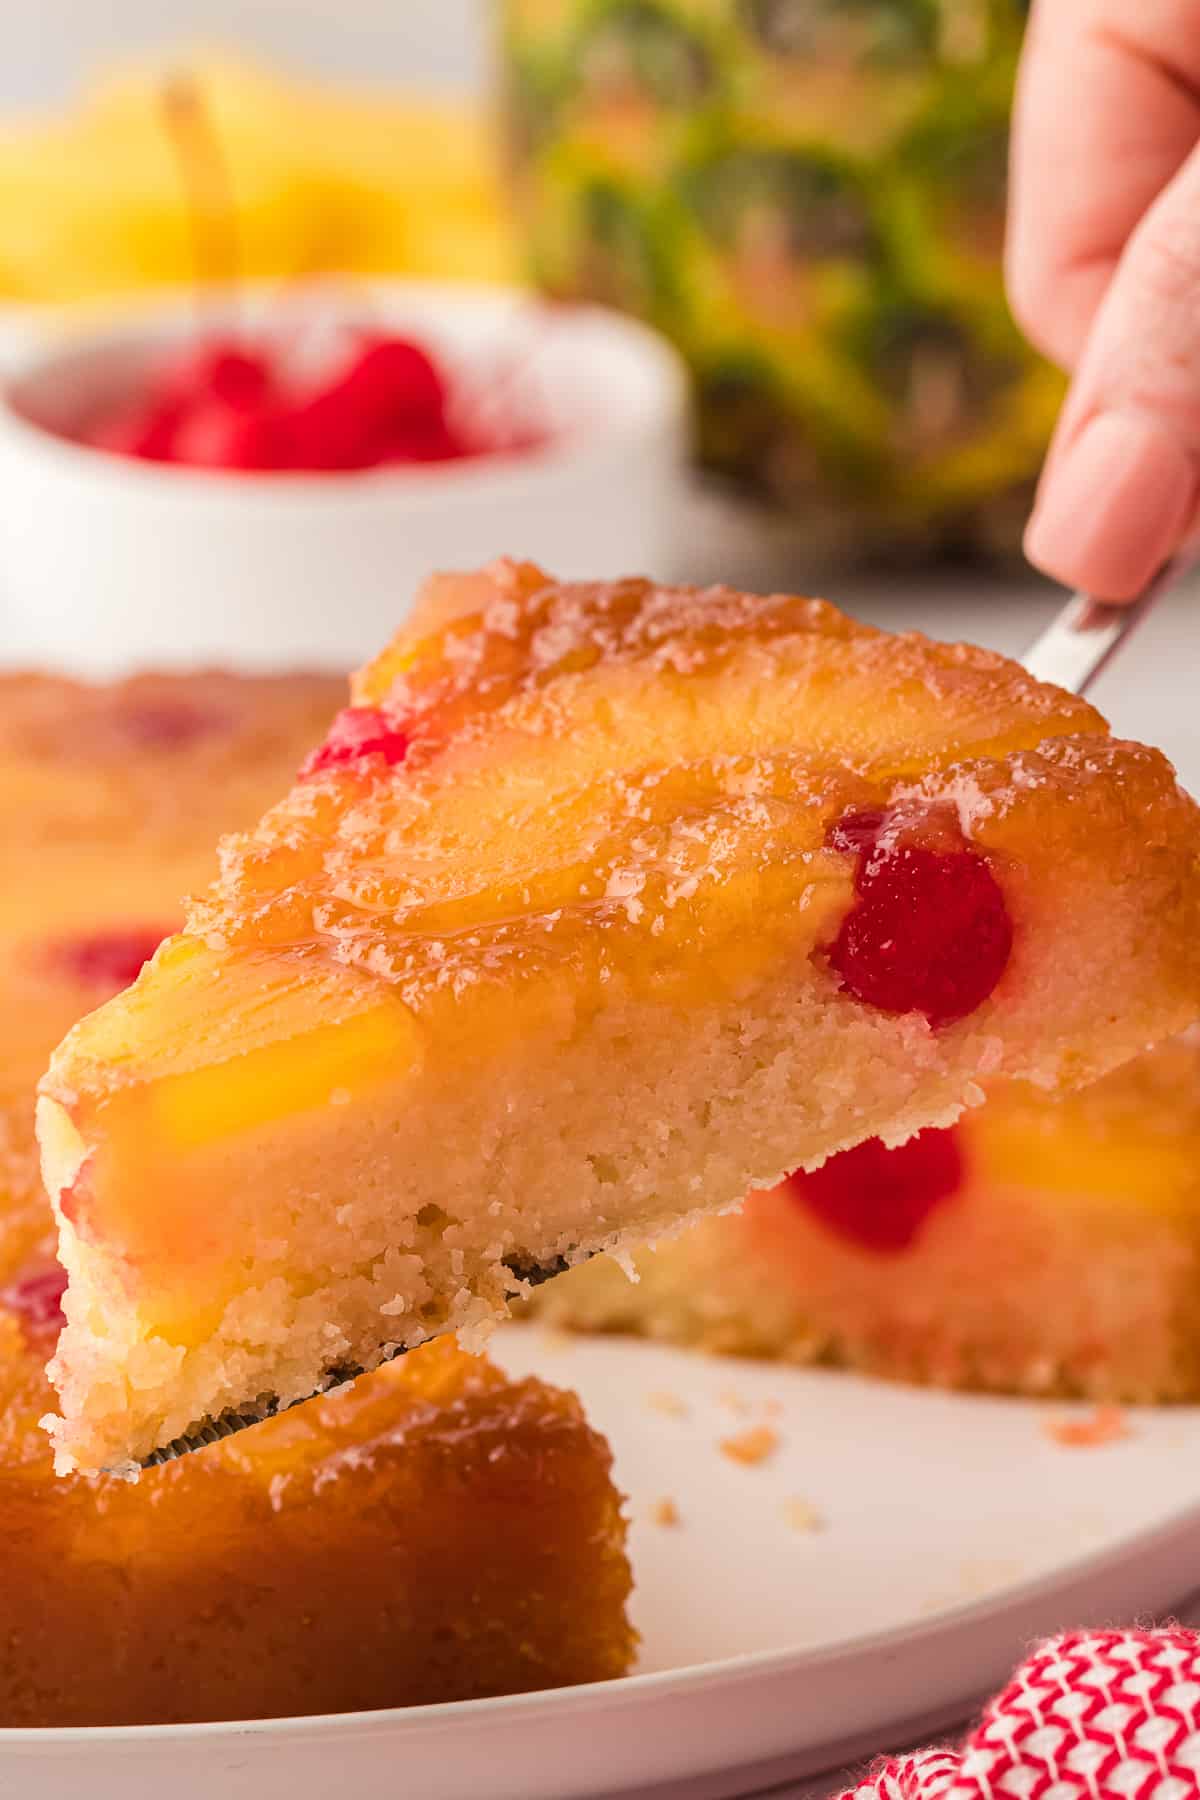 a slice of pineapple upside down cake being lifted off a plate with a pineapple, cherries and pineapple slices in the background and a red and white towel beside the plate